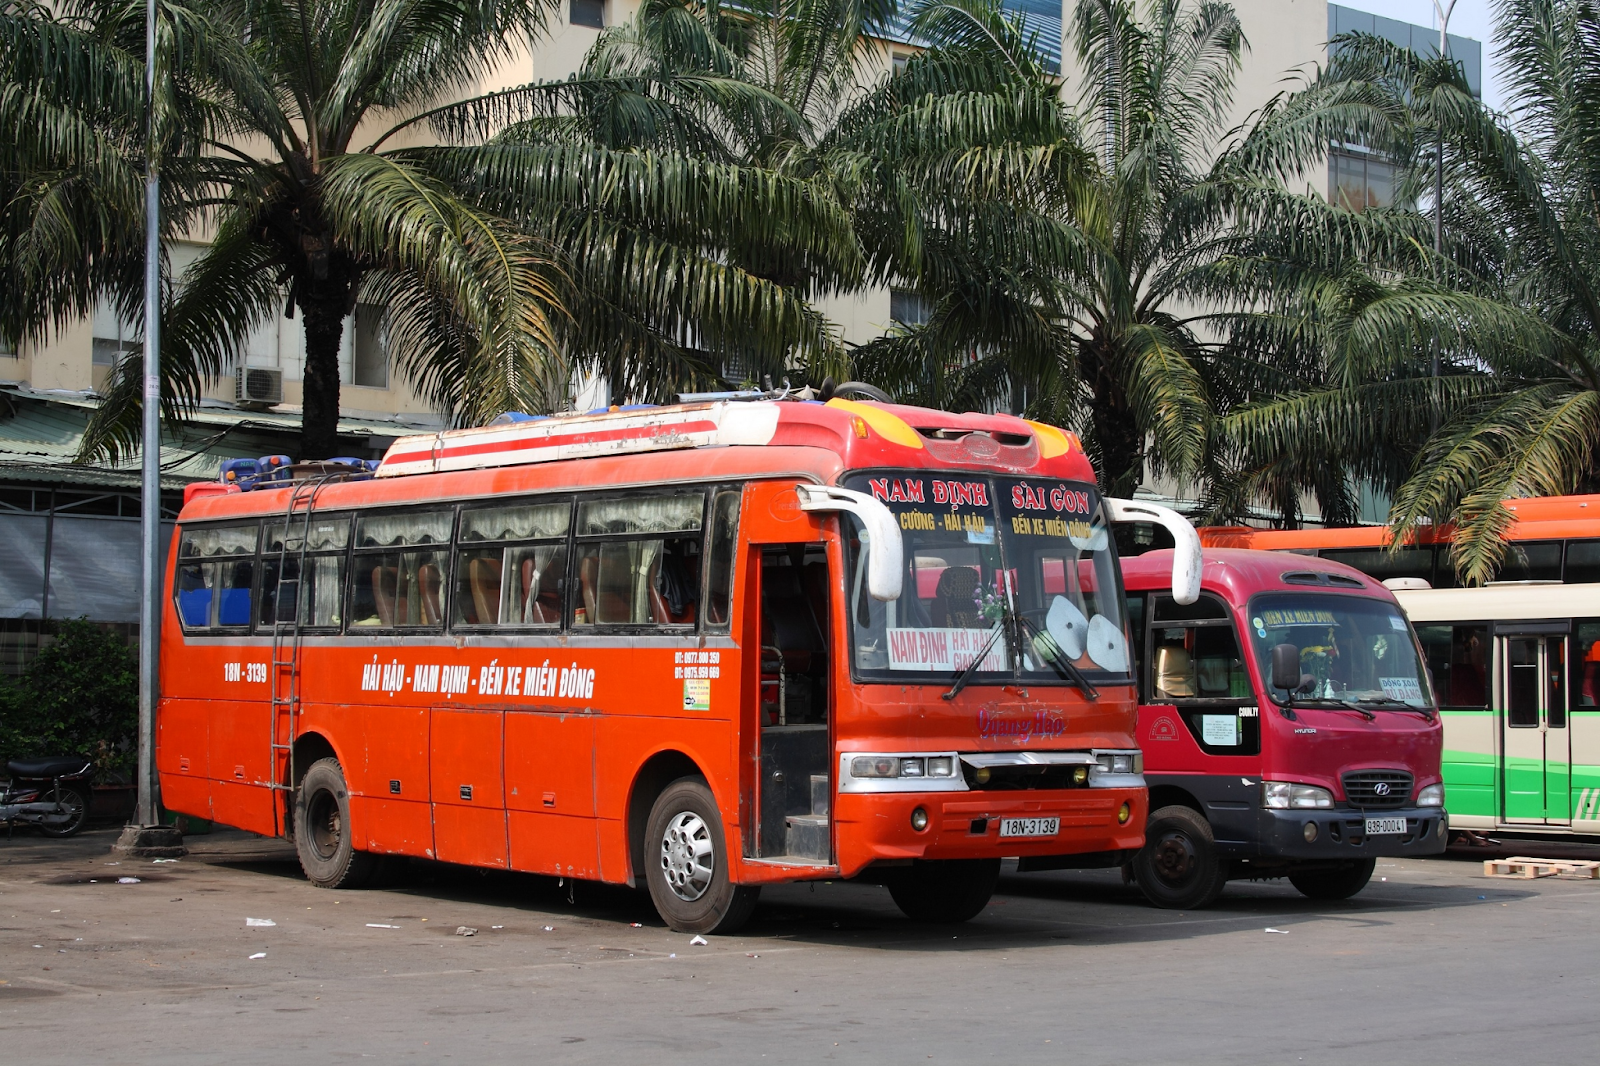 Bus to get from Hanoi to Halong Bay